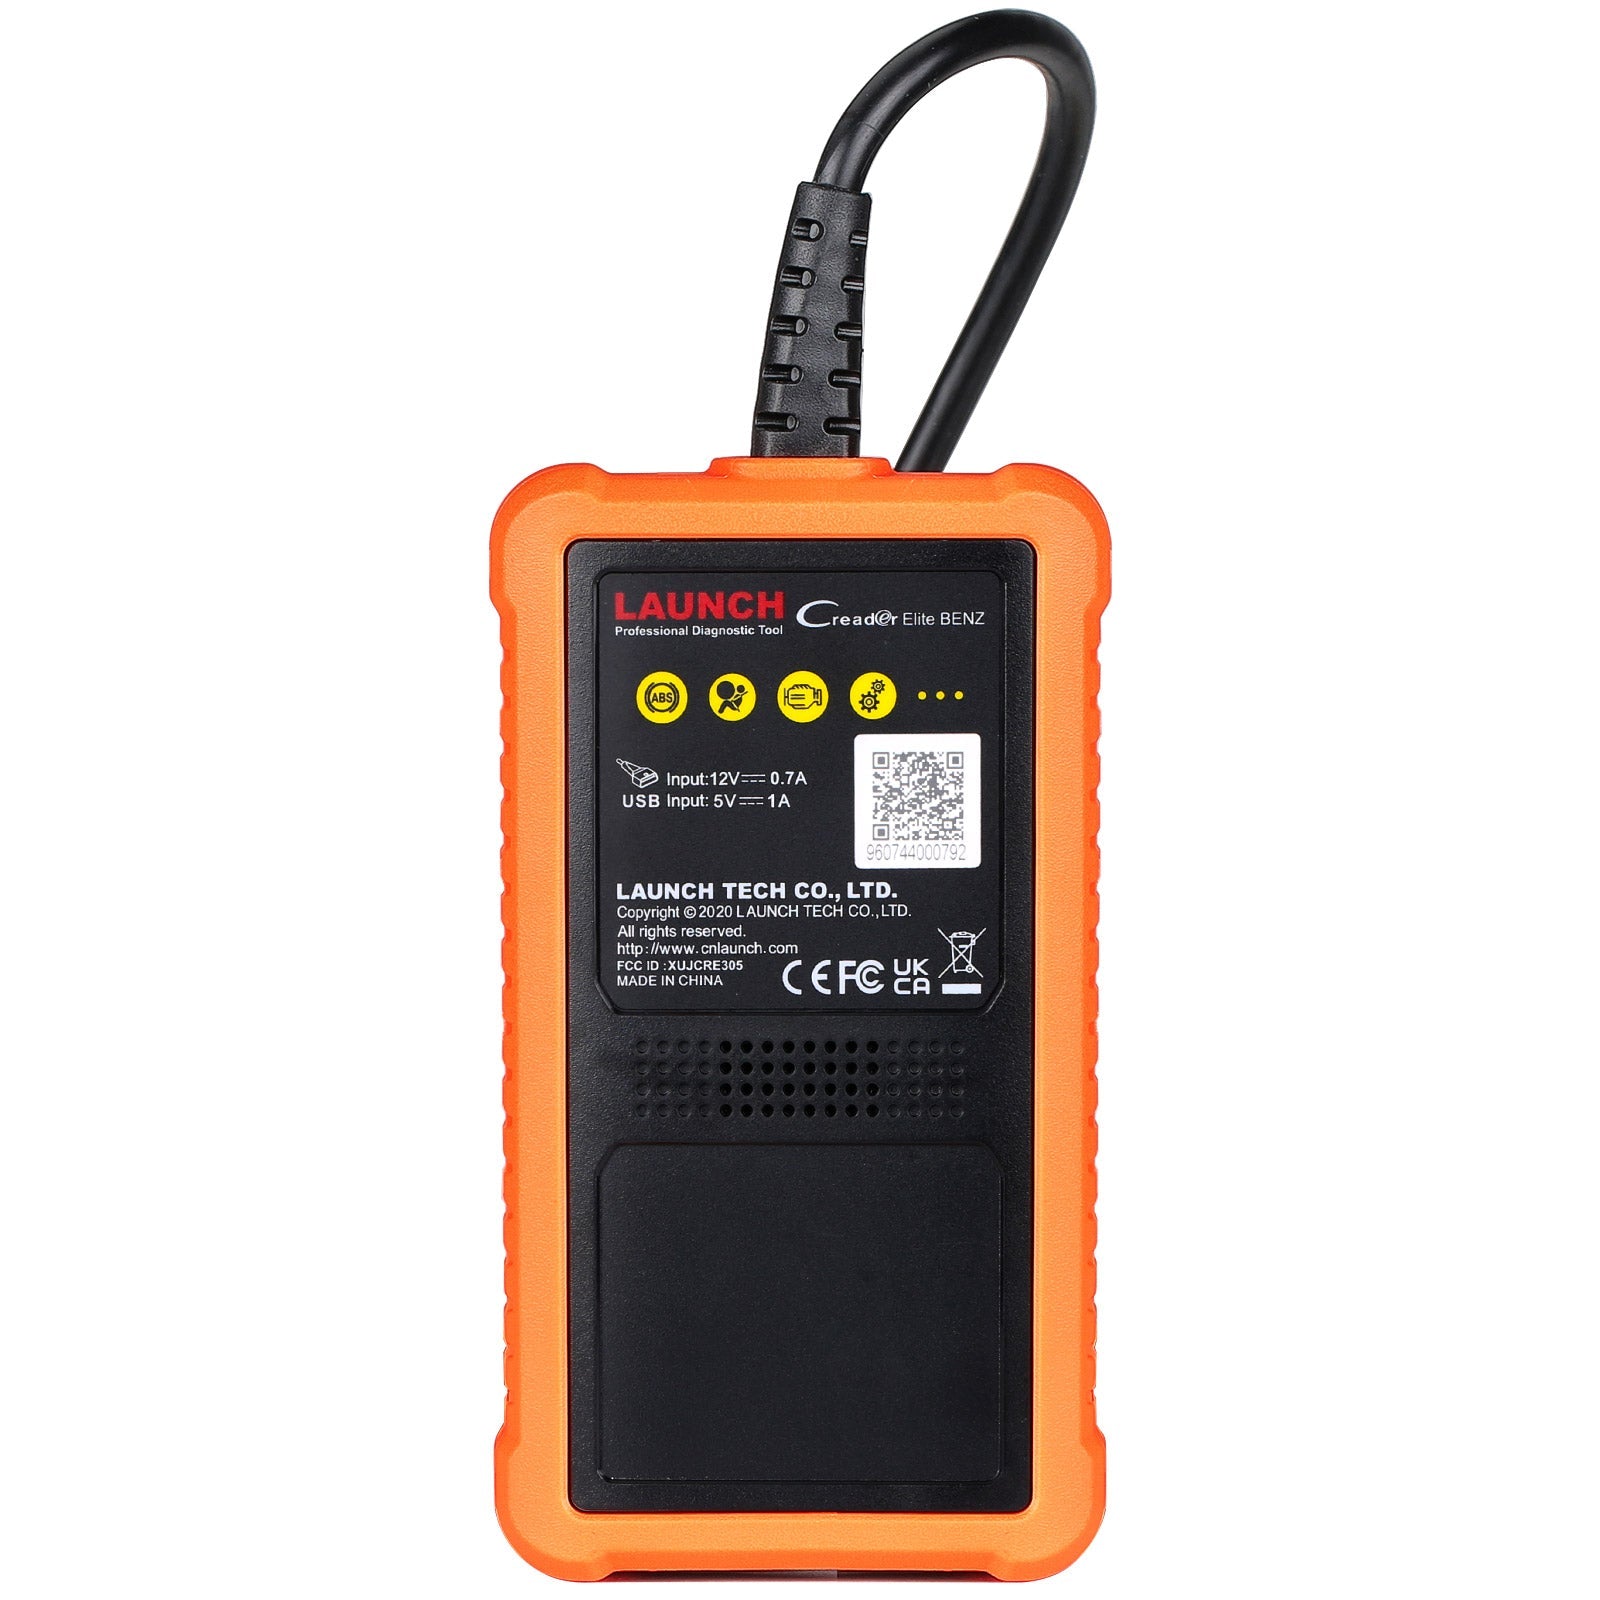 LAUNCH Creader Elite Benz OBD2 Scanner Code Reader + ABS & SRS Car Diagnostic Tool, 4 in 1 Live Data Graph, Auto VIN, WiFi Free Update